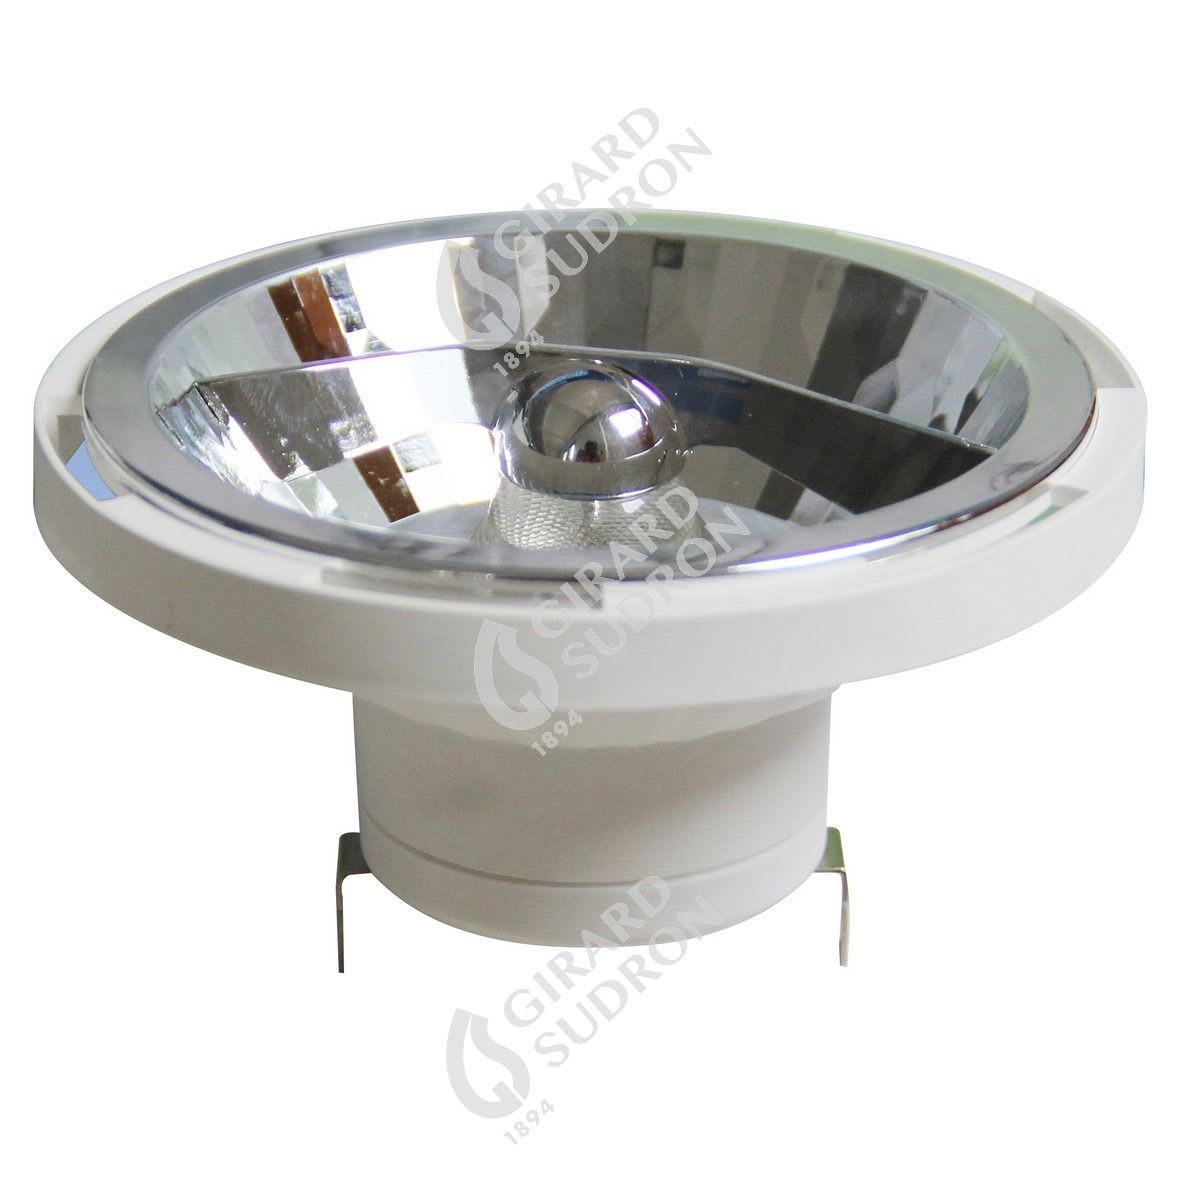 Girard Sudron - Spot AR111 14W G53 220-36V 2700k 45 Dimmable